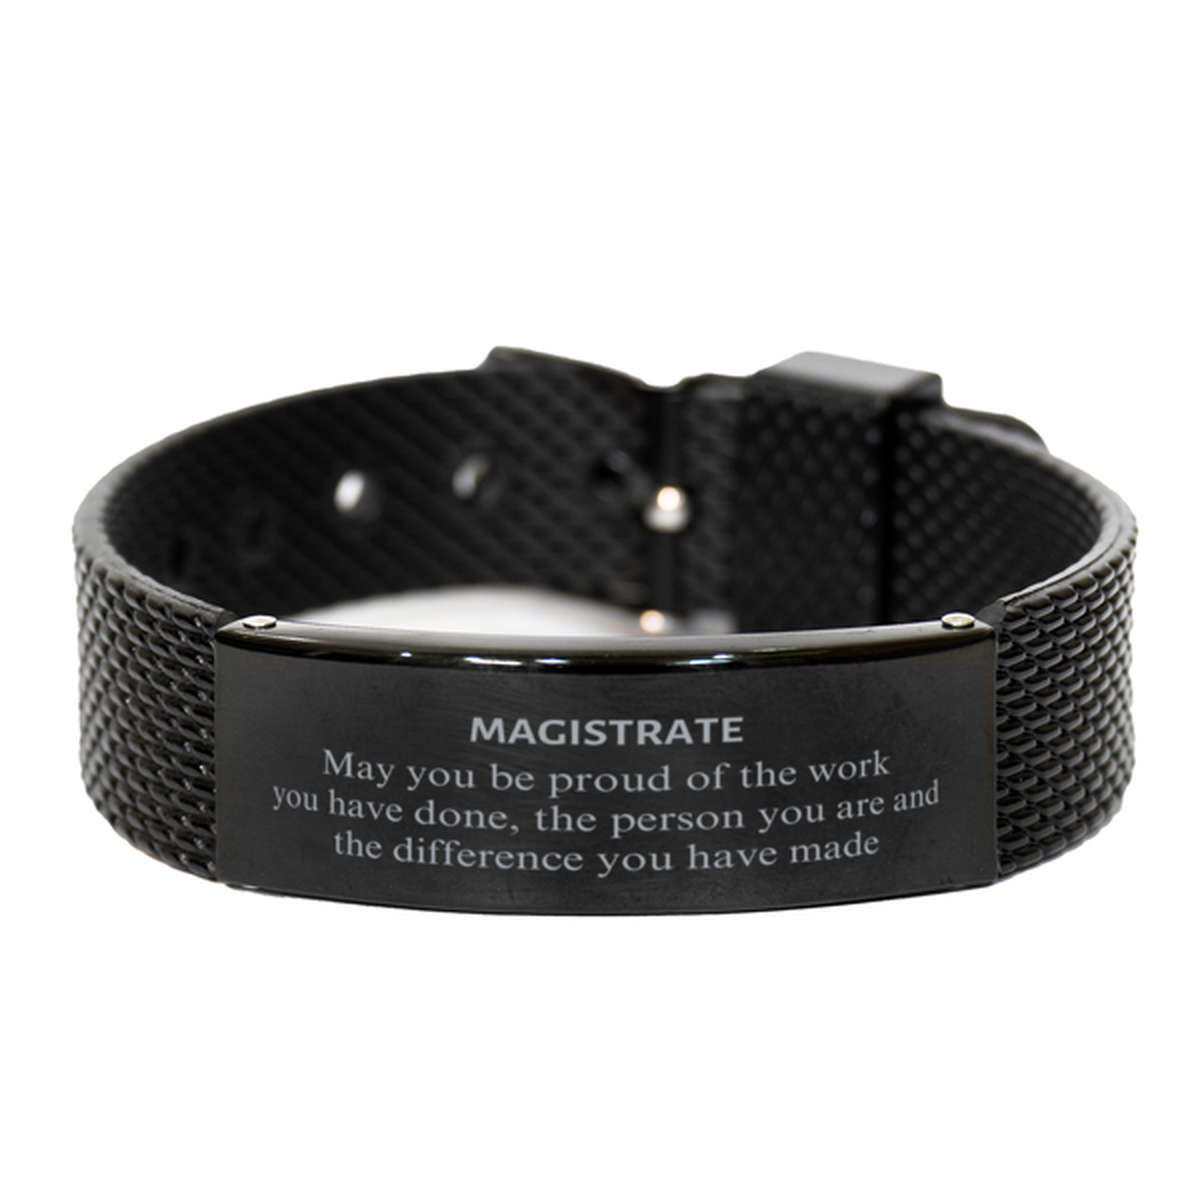 Magistrate May you be proud of the work you have done, Retirement Magistrate Black Shark Mesh Bracelet for Colleague Appreciation Gifts Amazing for Magistrate